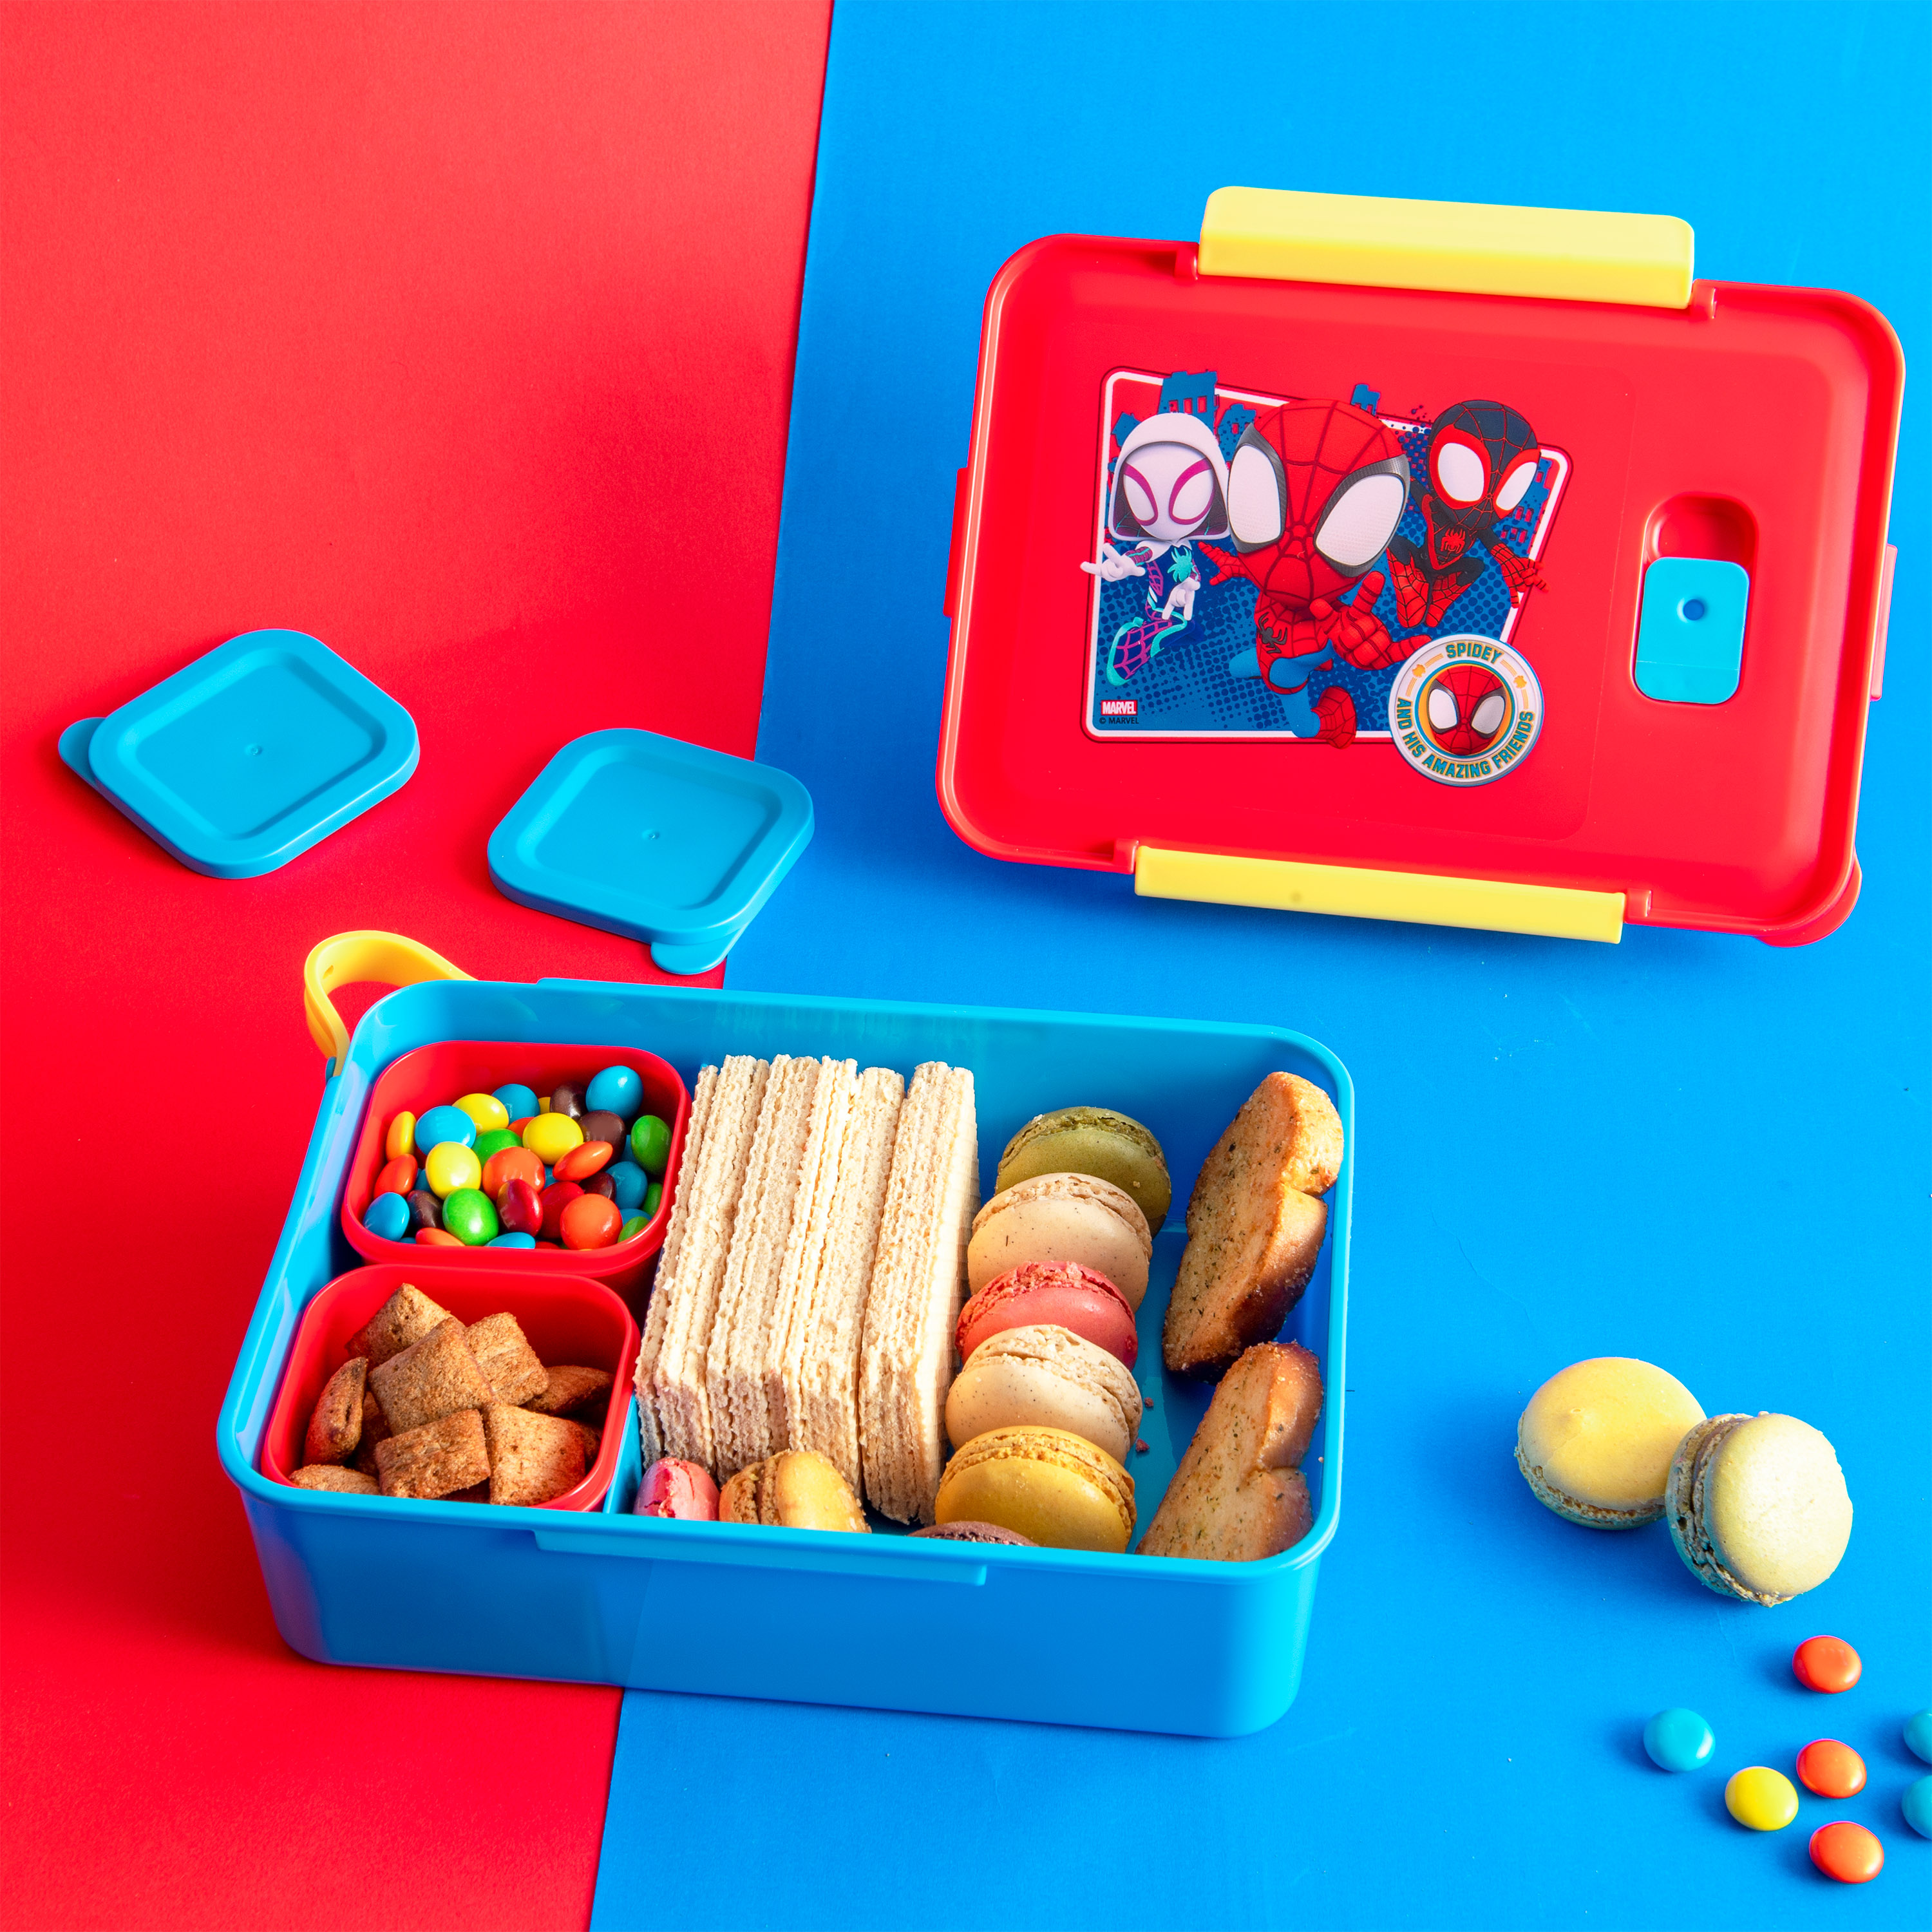 Spider-Man and His Amazing Friends Reusable Divided Bento Box, Spider-Friends, 3-piece set slideshow image 4